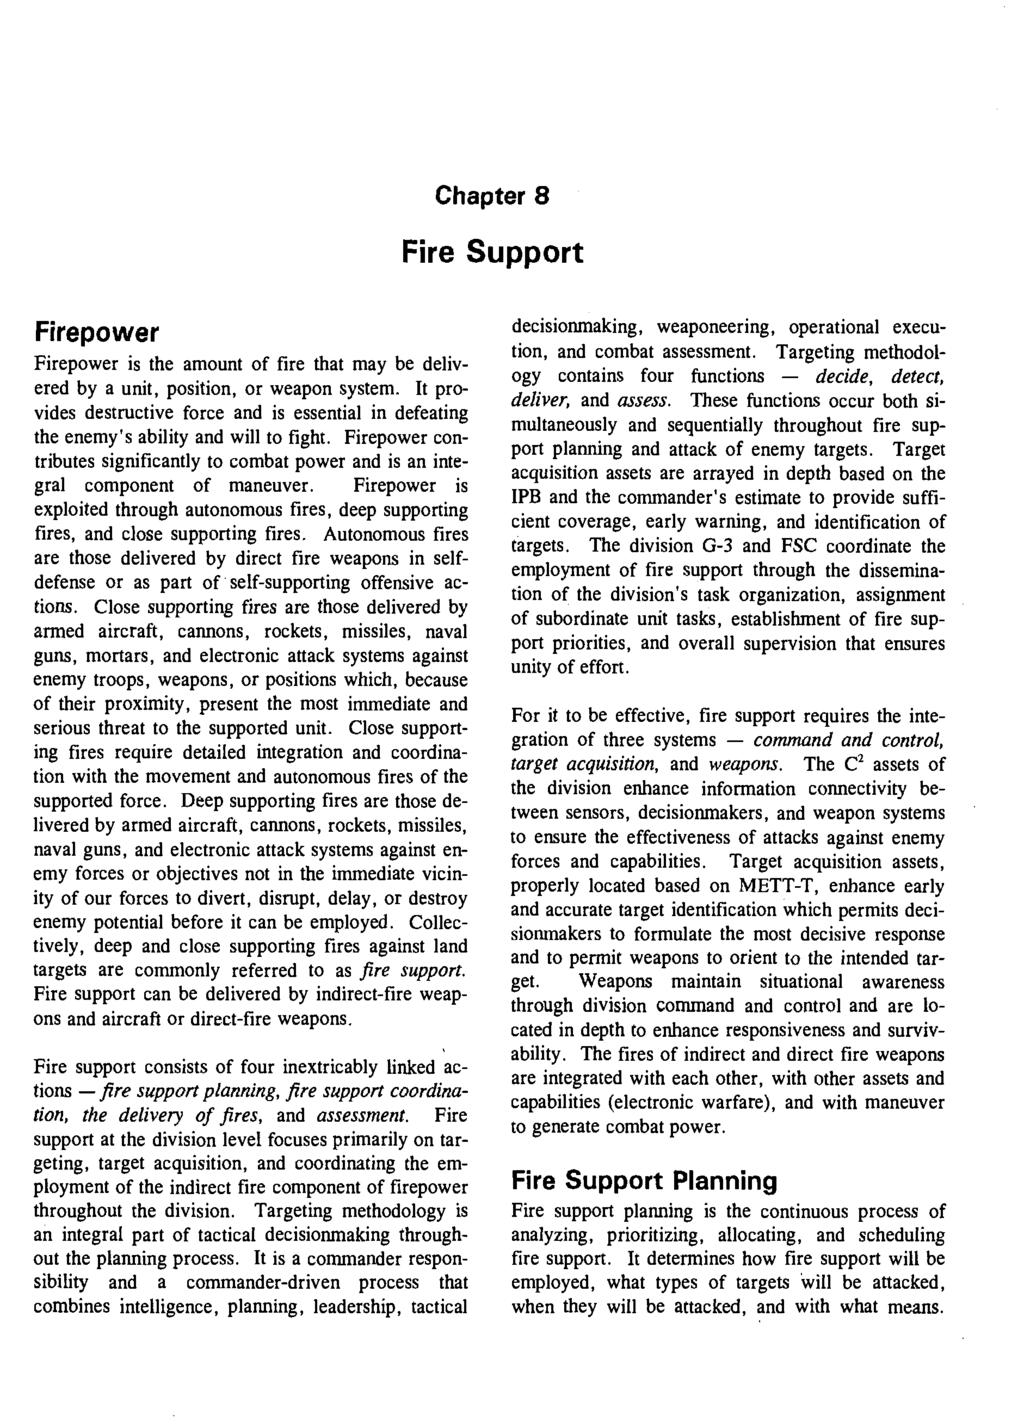 Chapter 8 Fire Support Firepower Firepower is the amount of fire that may be delivered by a unit, position, or weapon system.